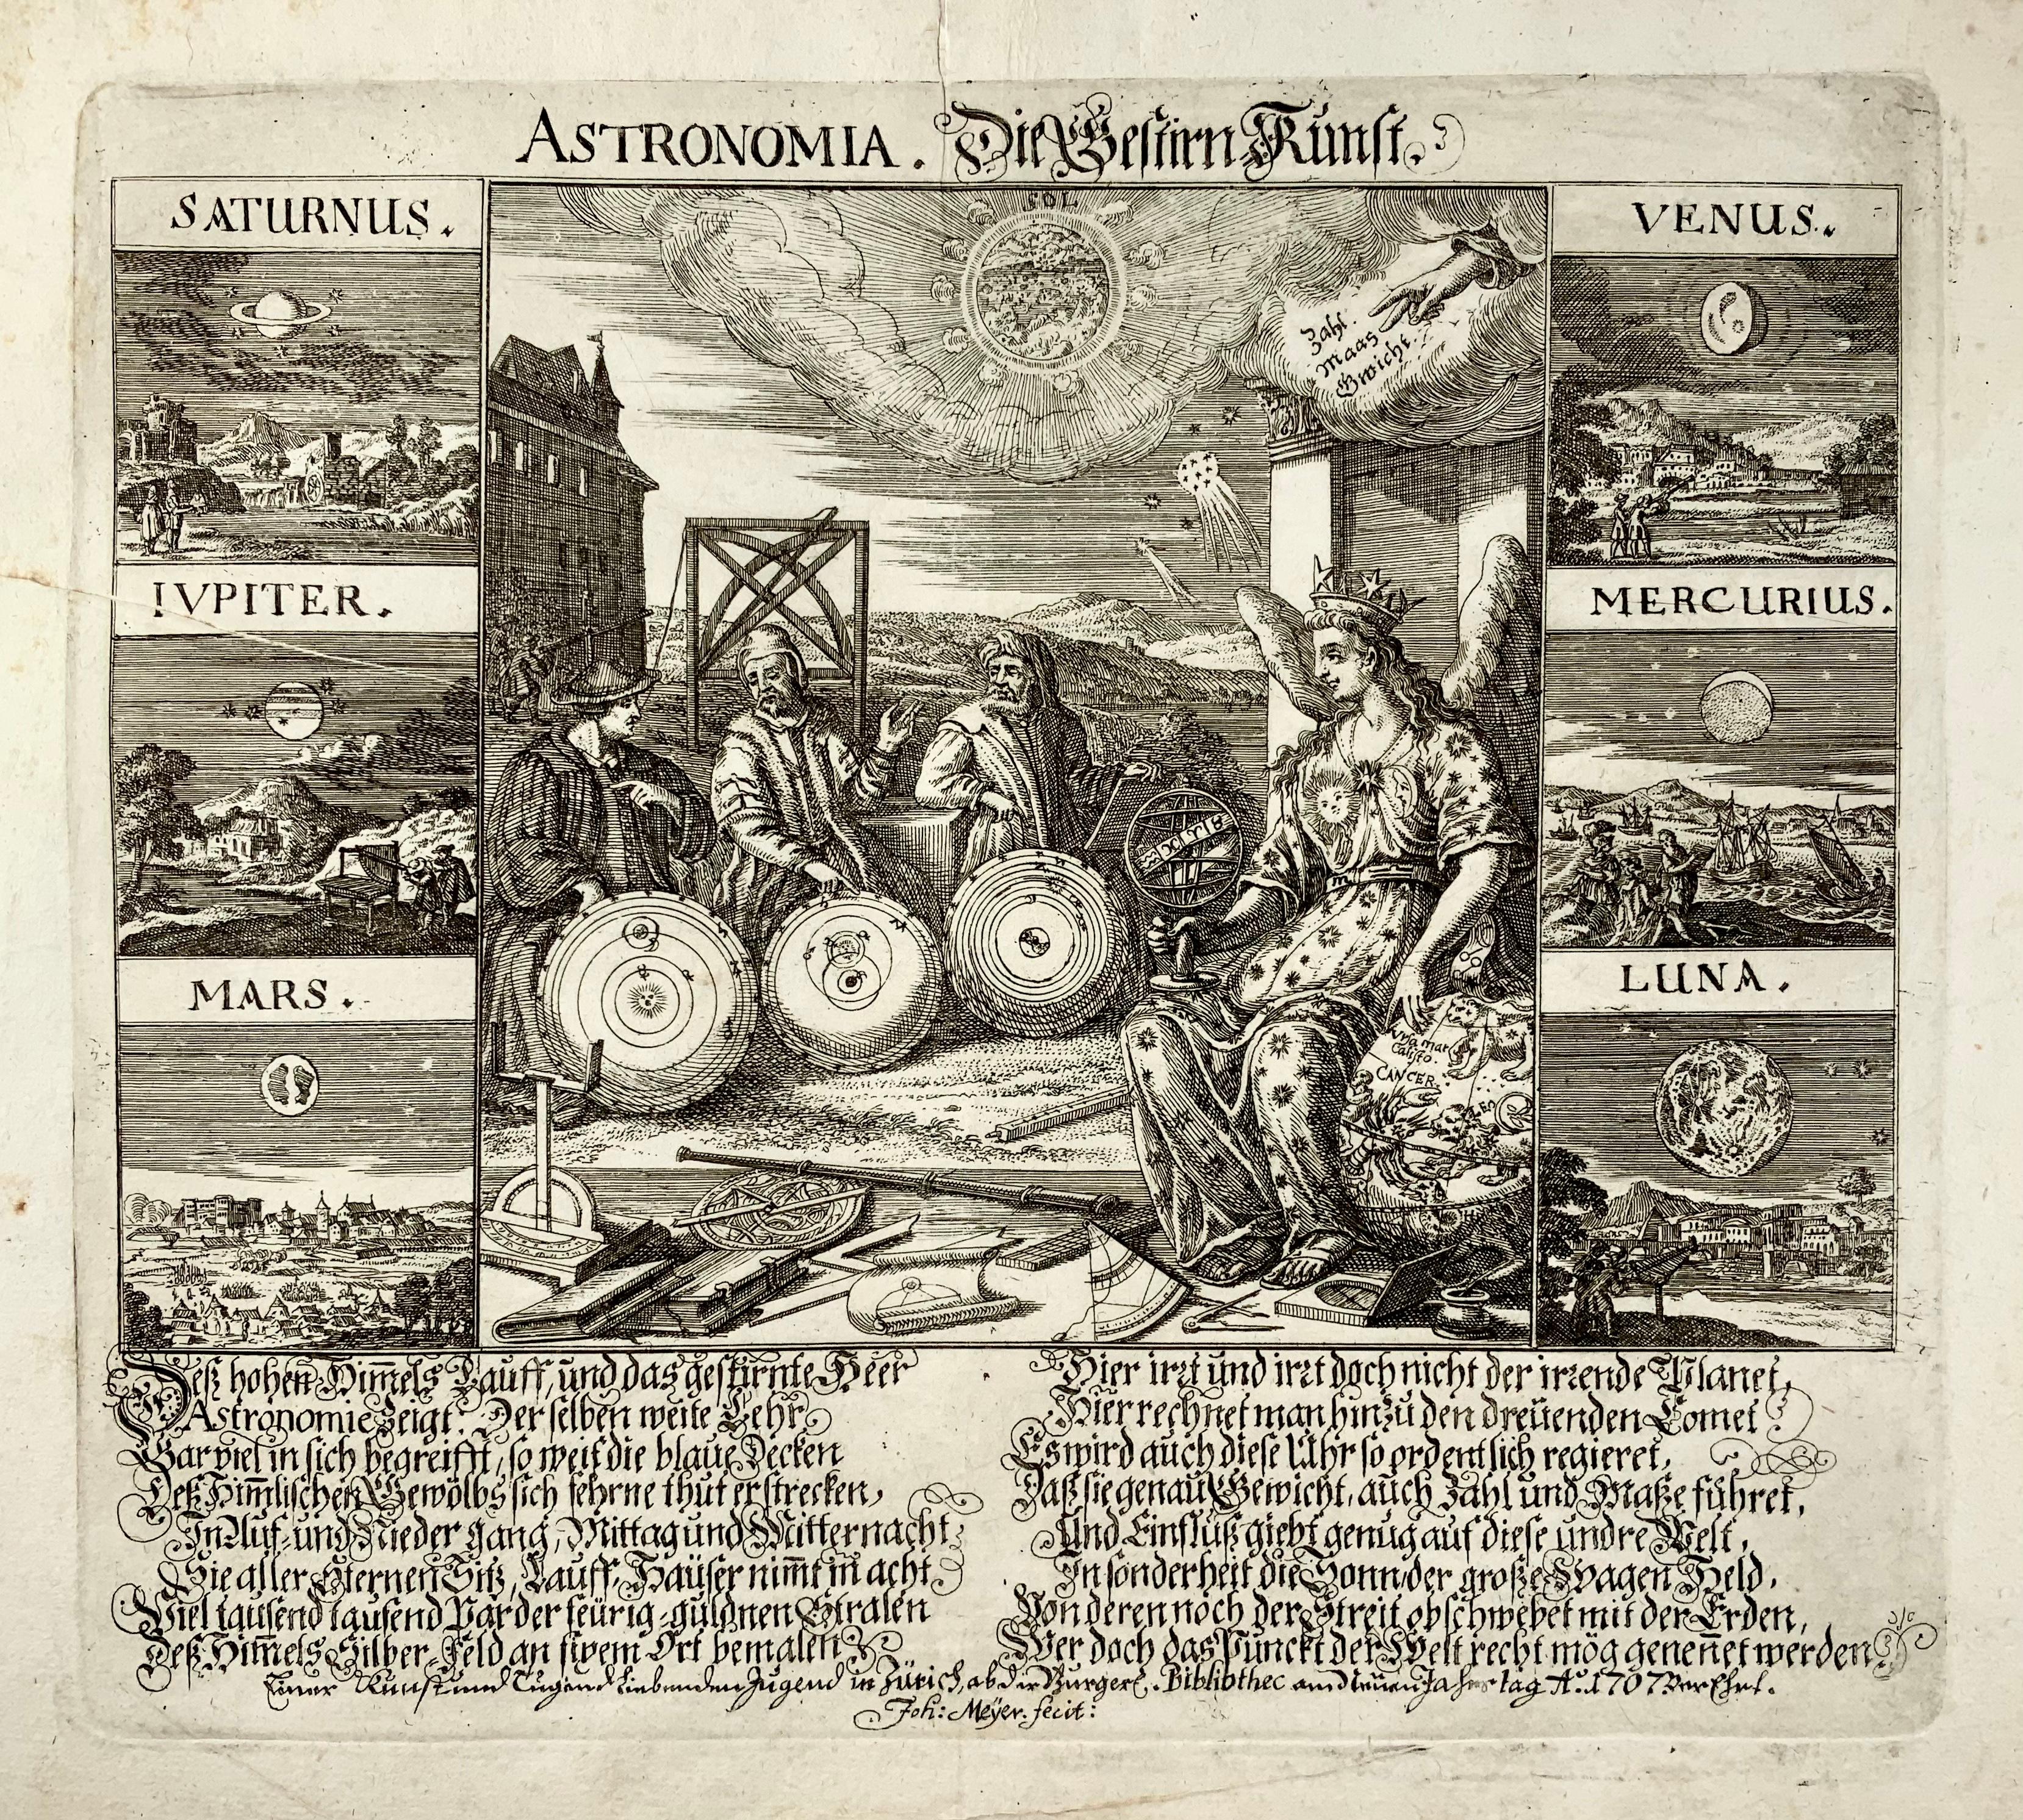 Extremely rare Broadside by Johann Meyer (1655-1712).

Astronomia. Die Gestirn-Kunst.

Publisher: 